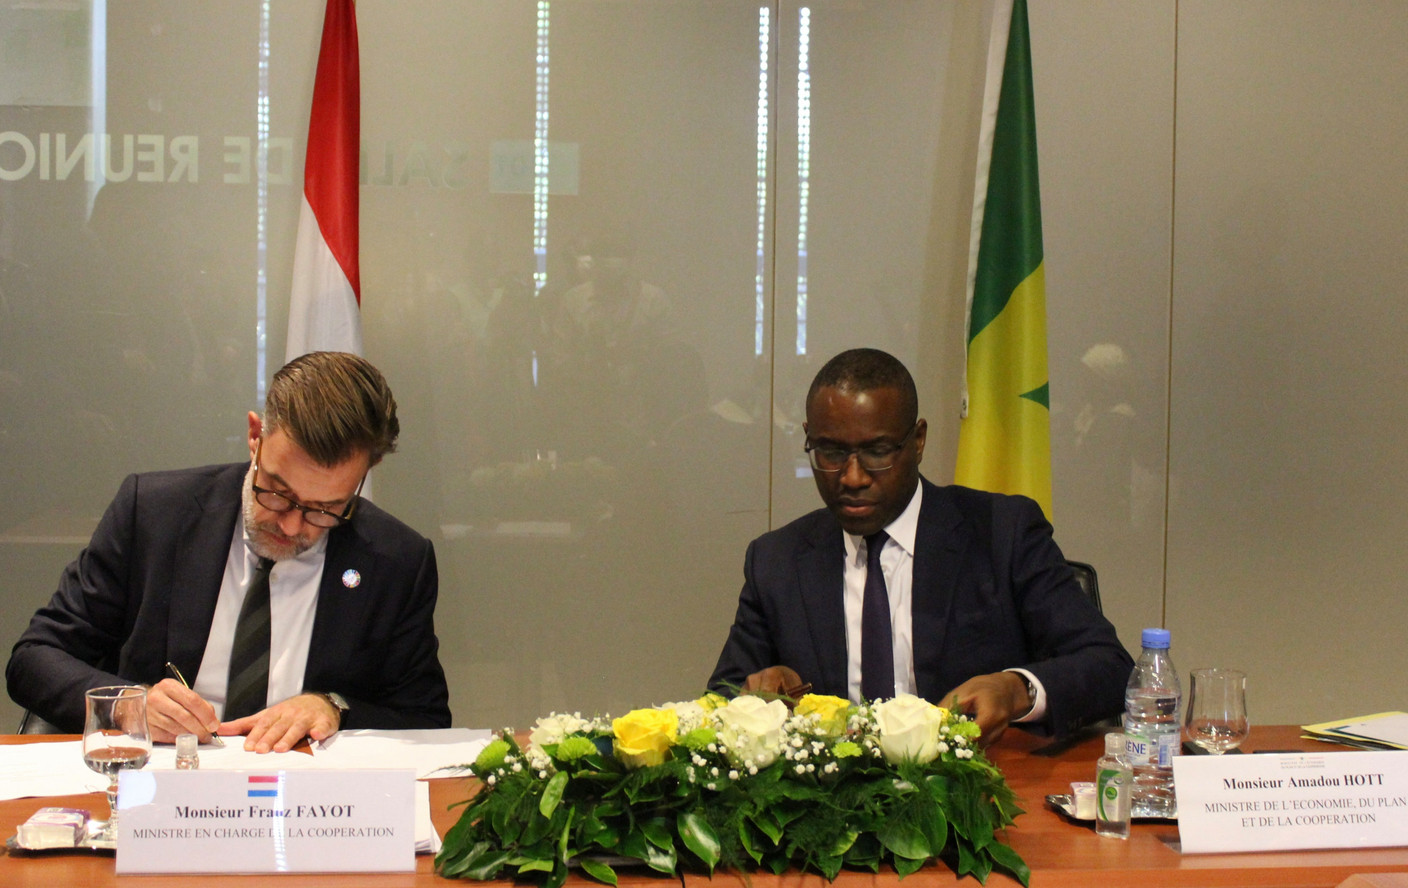 Cooperation and humanitarian action minister Franz Fayot met with Amadou Hott, Senegal's economy minister and pledged additional financial assistance for education and the improvement of medical assistance. Photo: MAEE